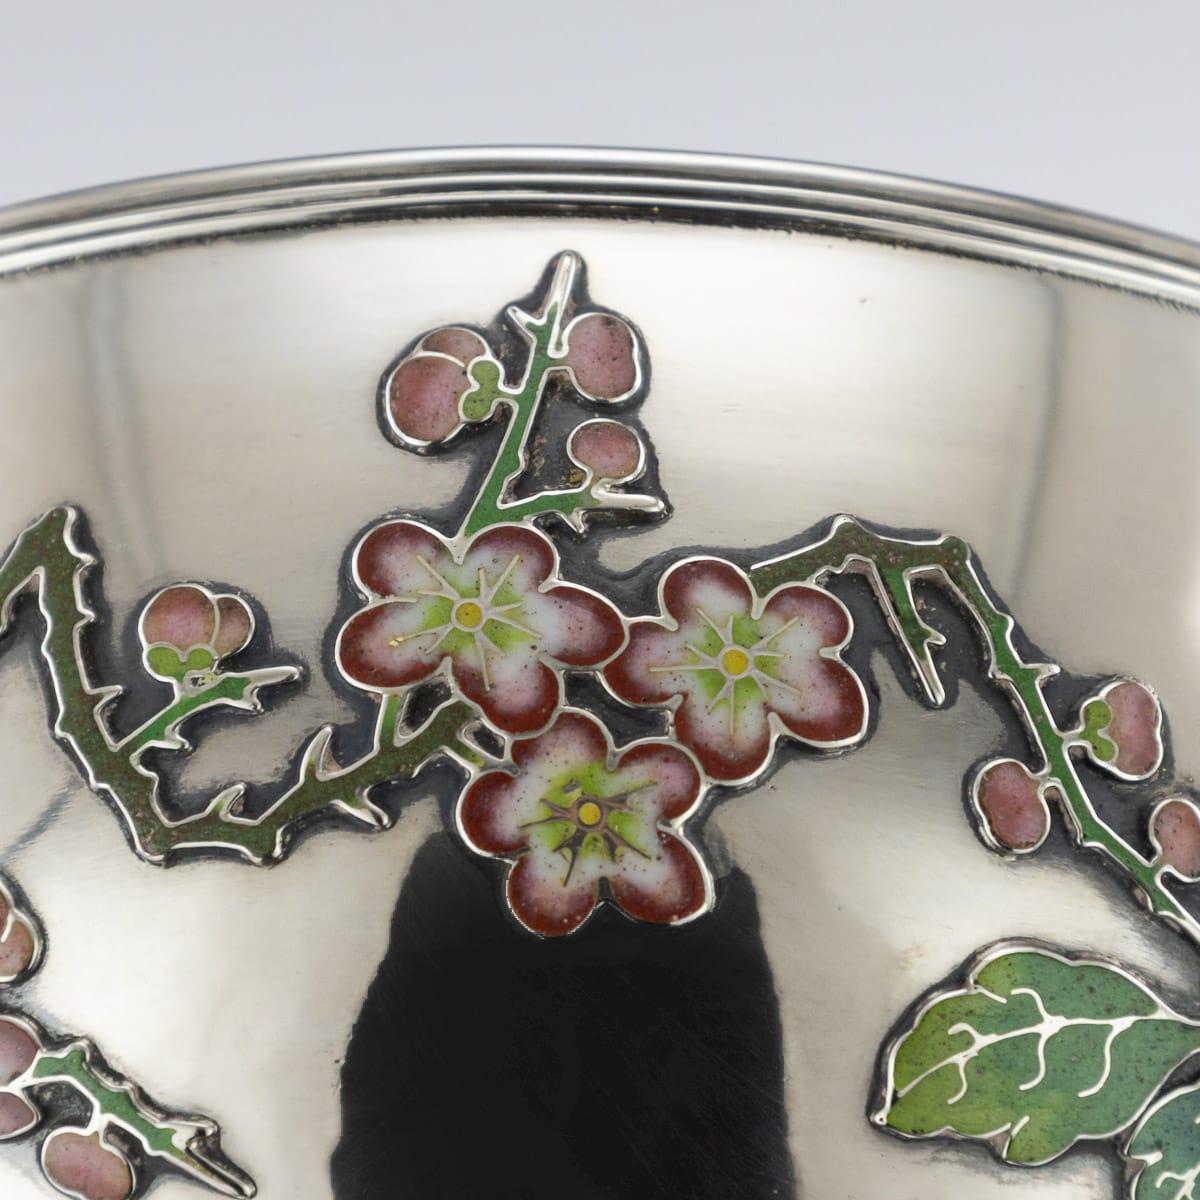 19th Century Rare Chinese Export Solid Silver & Enamel Bowl, Wo Kwong circa 1890 For Sale 12